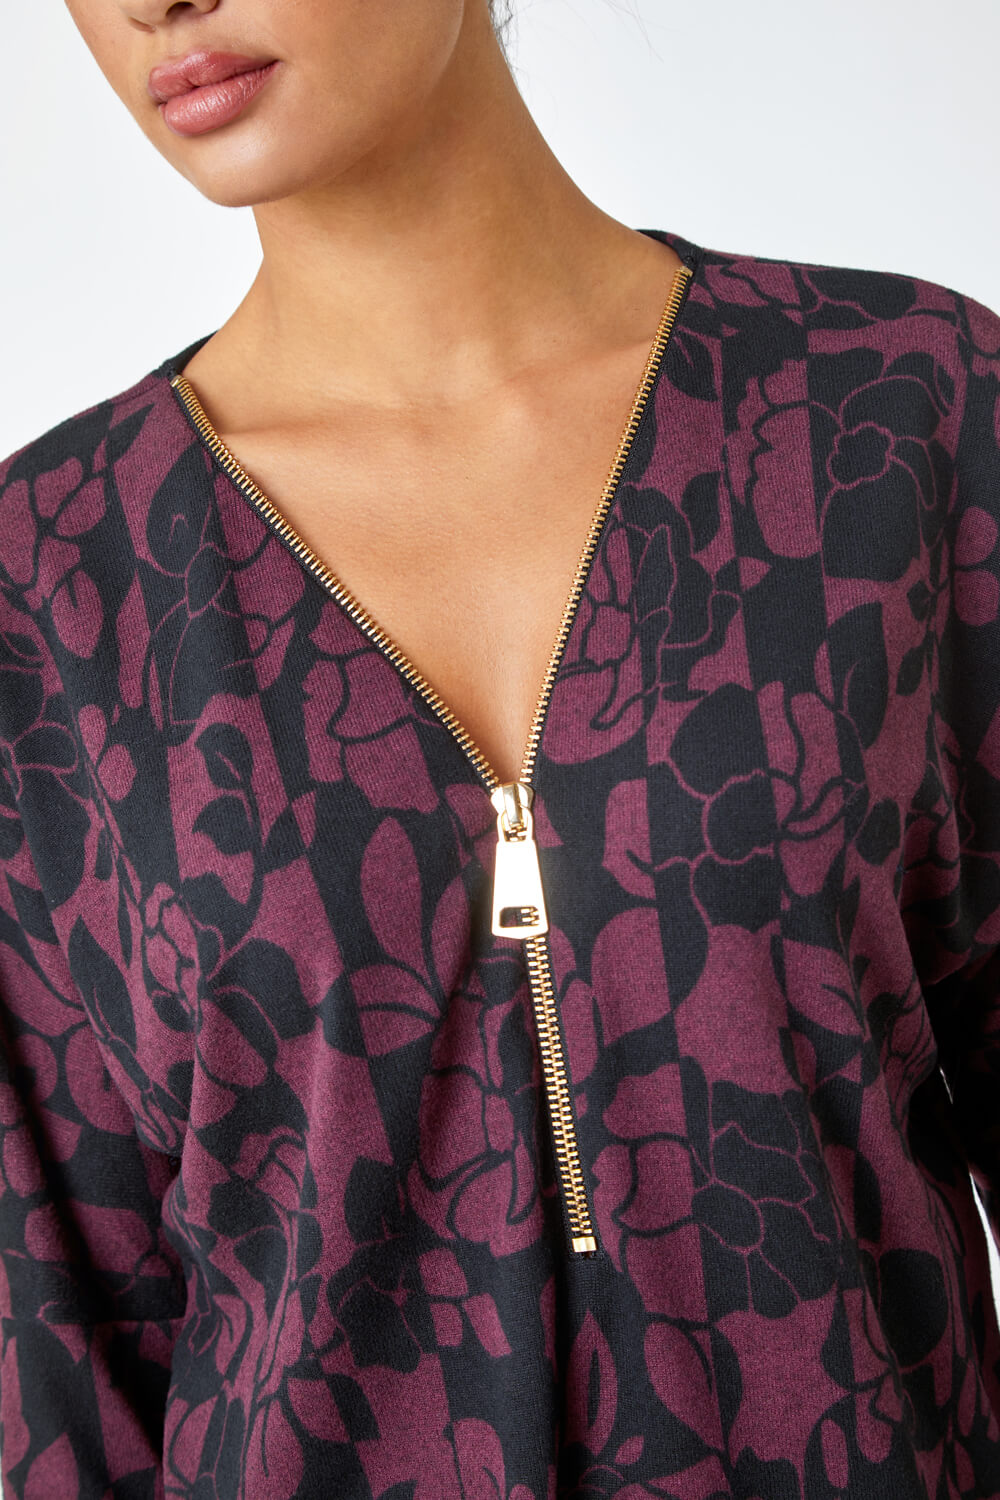 Burgundy Floral Stretch Jersey Zip Detail Top, Image 5 of 5